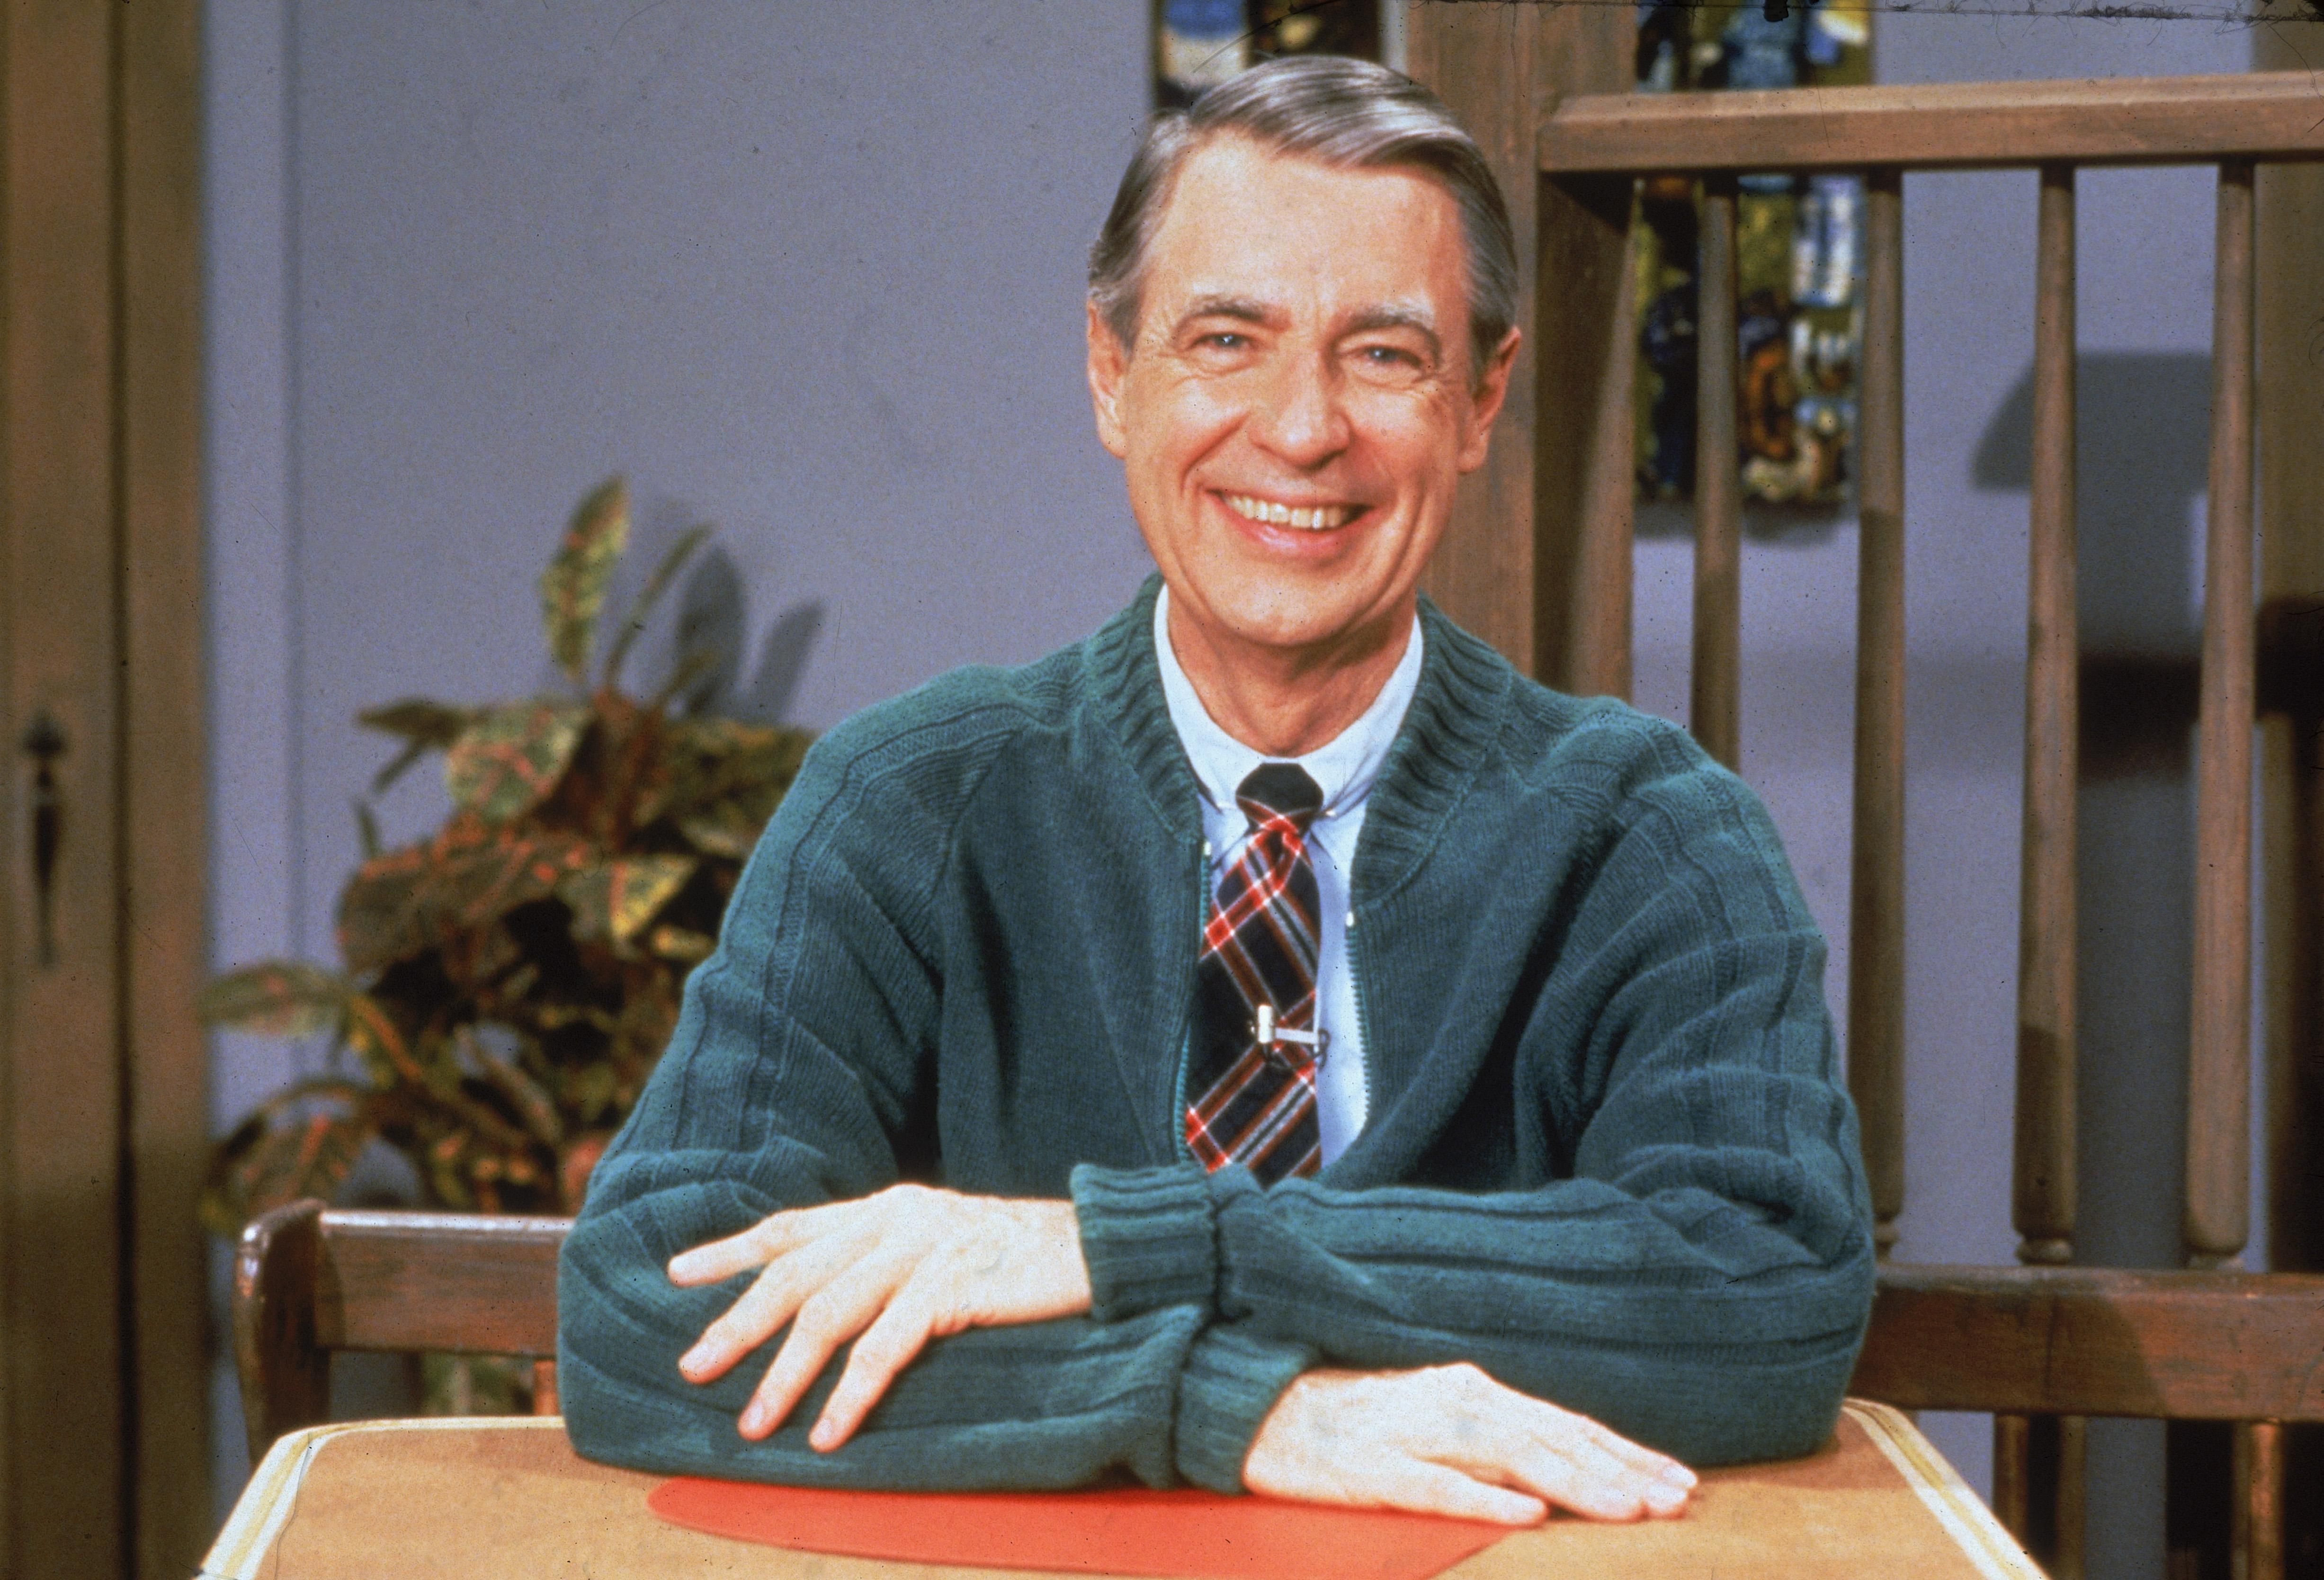 As “Beautiful Day in the Neighborhood” celebrates the life and work of Fred Rogers, we can look to Rogers’s work for lessons on building a healthier world for our youth. (Photo: Fotos International/Courtesy of Getty Images)